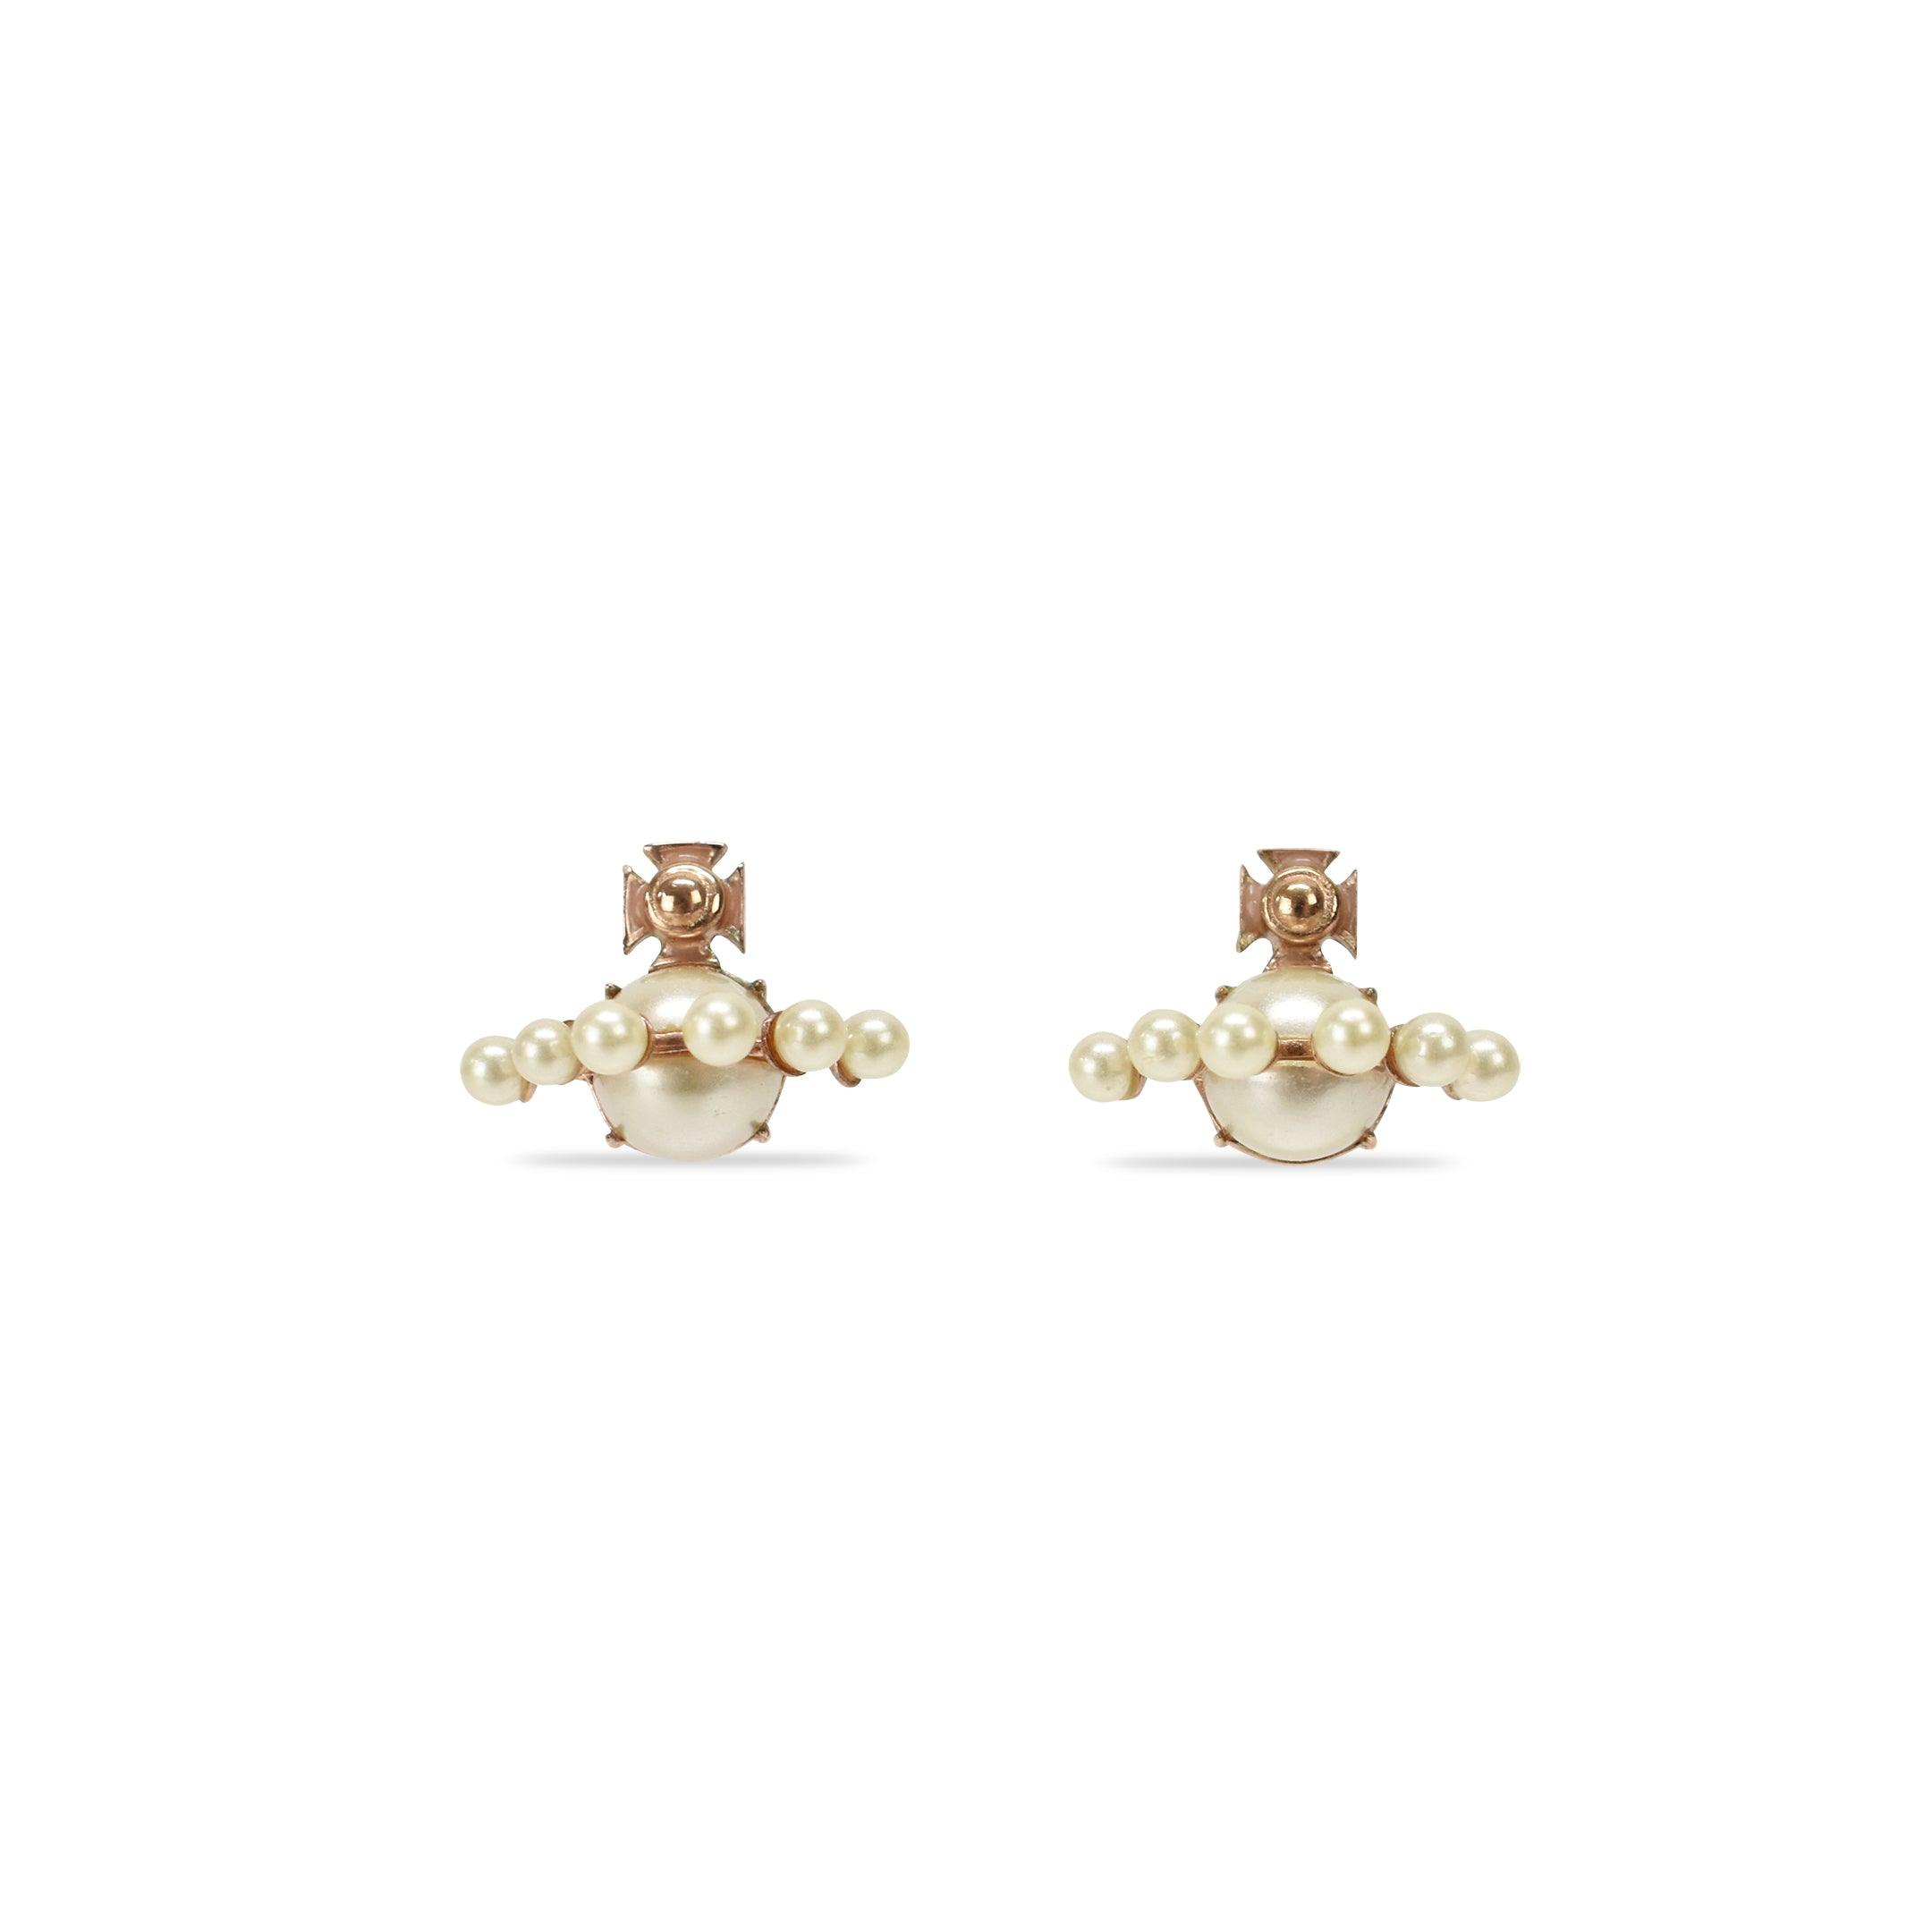 Vivienne Westwood 'Orb' Earrings - Fashionably Yours